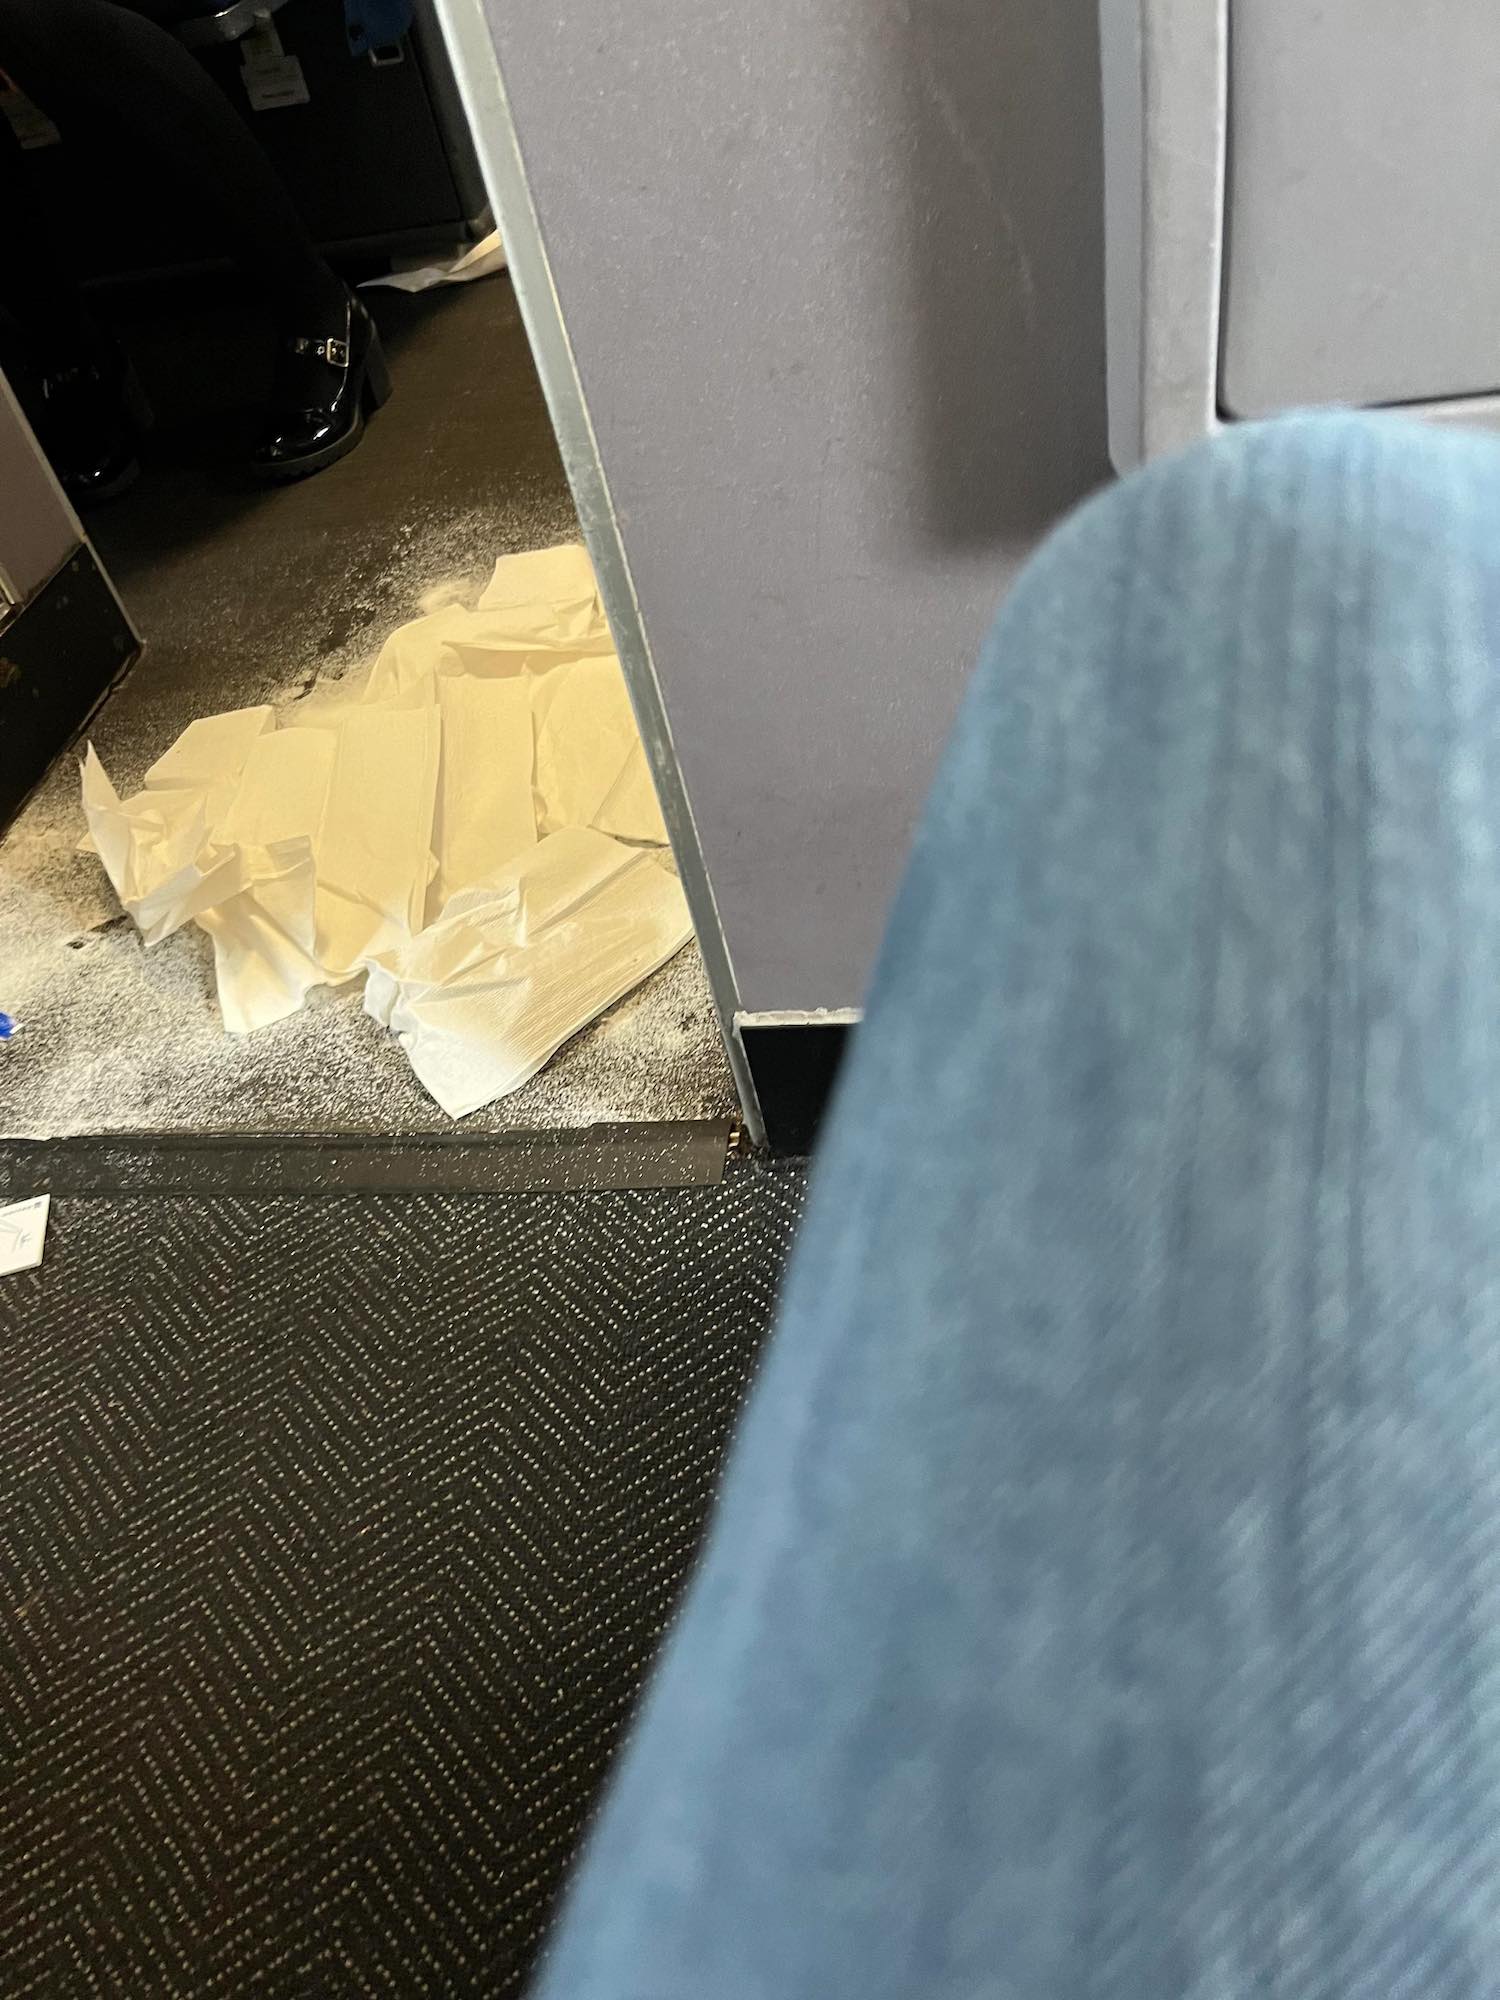 a pile of white paper towels on the floor